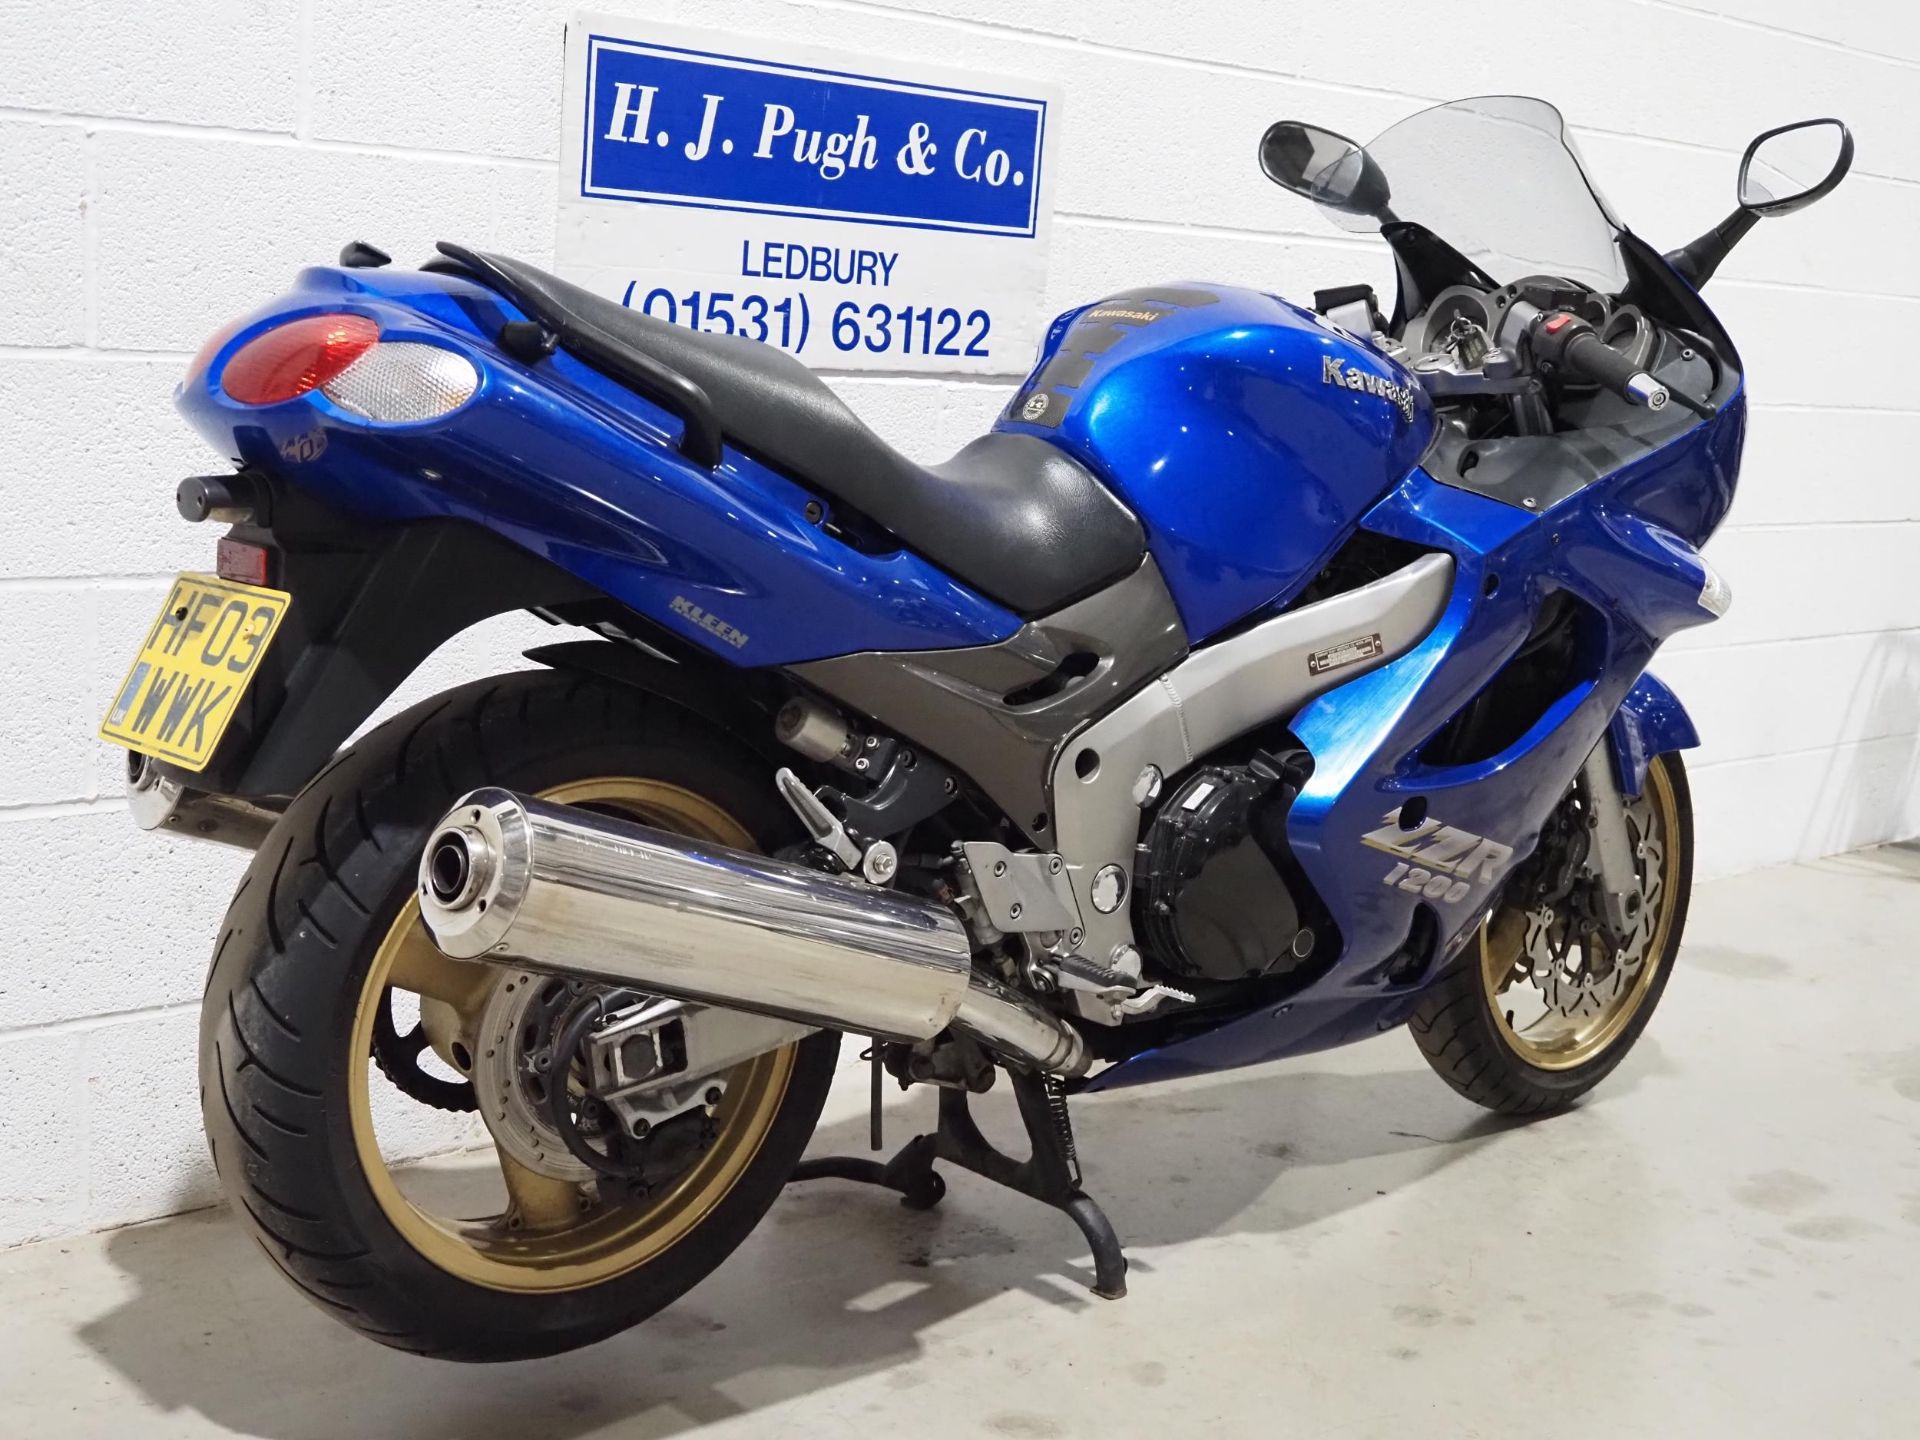 Kawasaki ZZR1200 motorcycle. 2003. 1164cc. Runs and rides. Comes with history including invoices and - Image 3 of 5